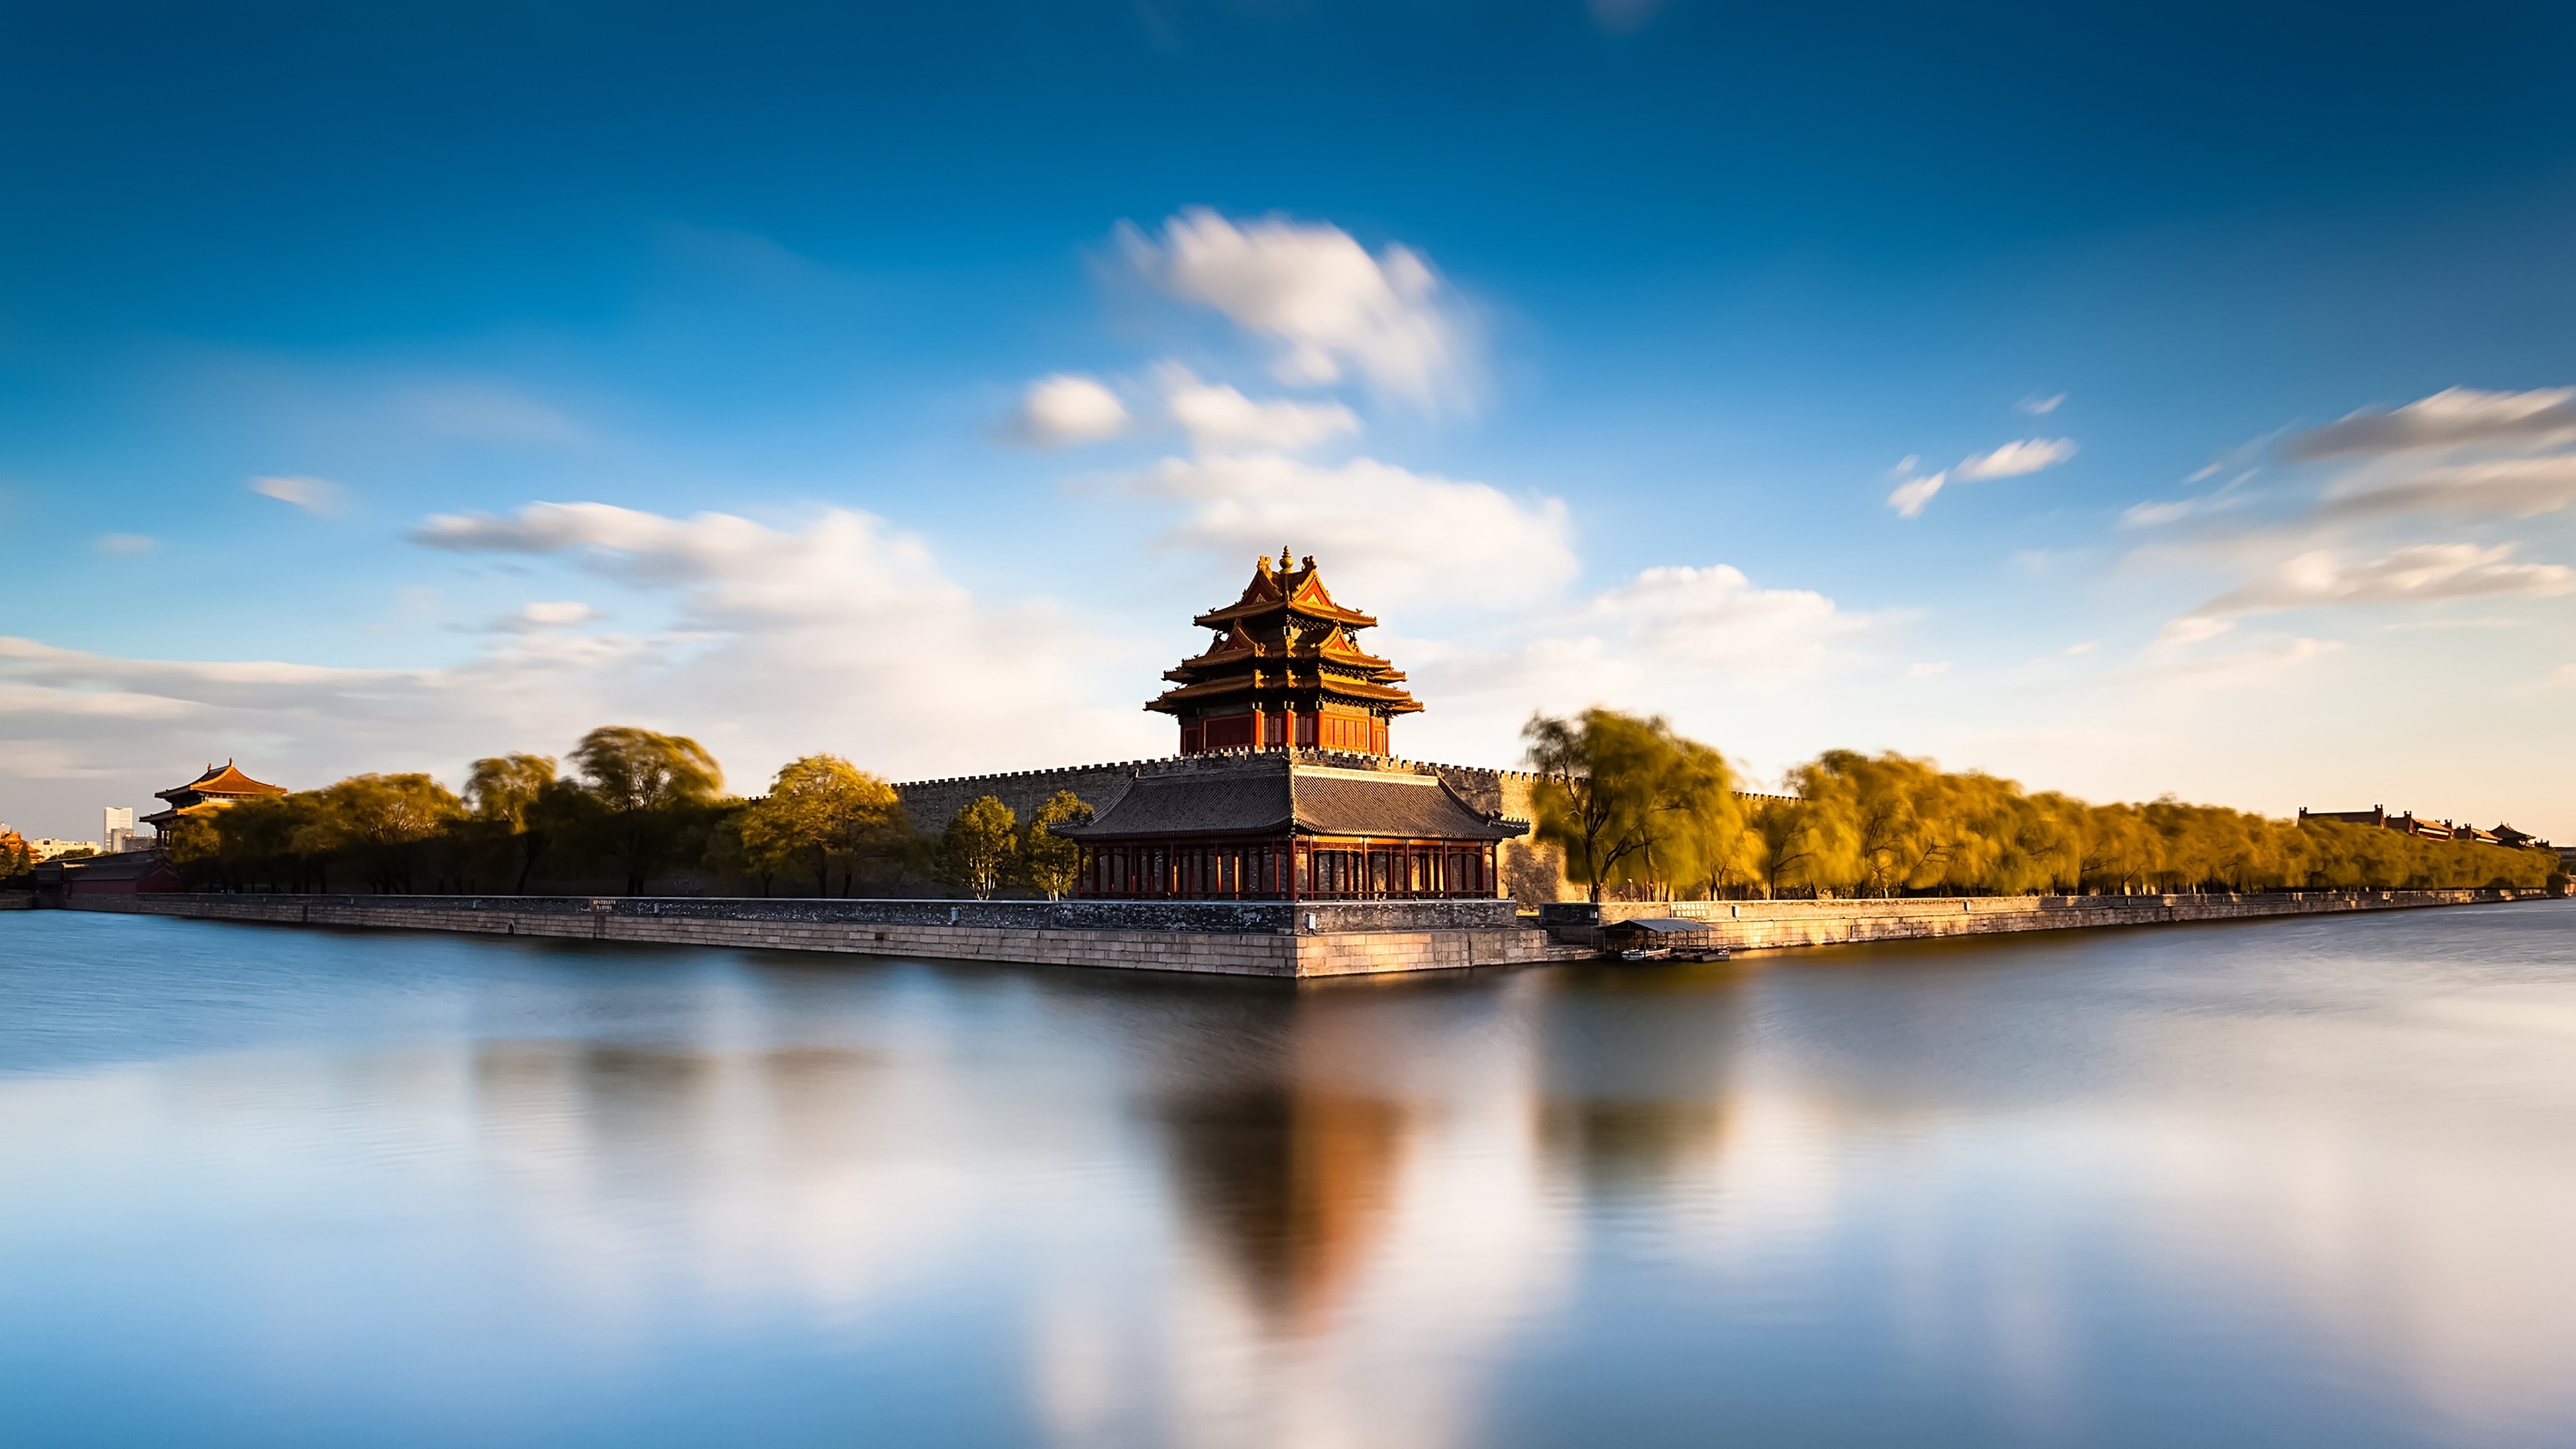 General 3840x2160 palace Asian architecture long exposure tower China Beijing reflection building Asia